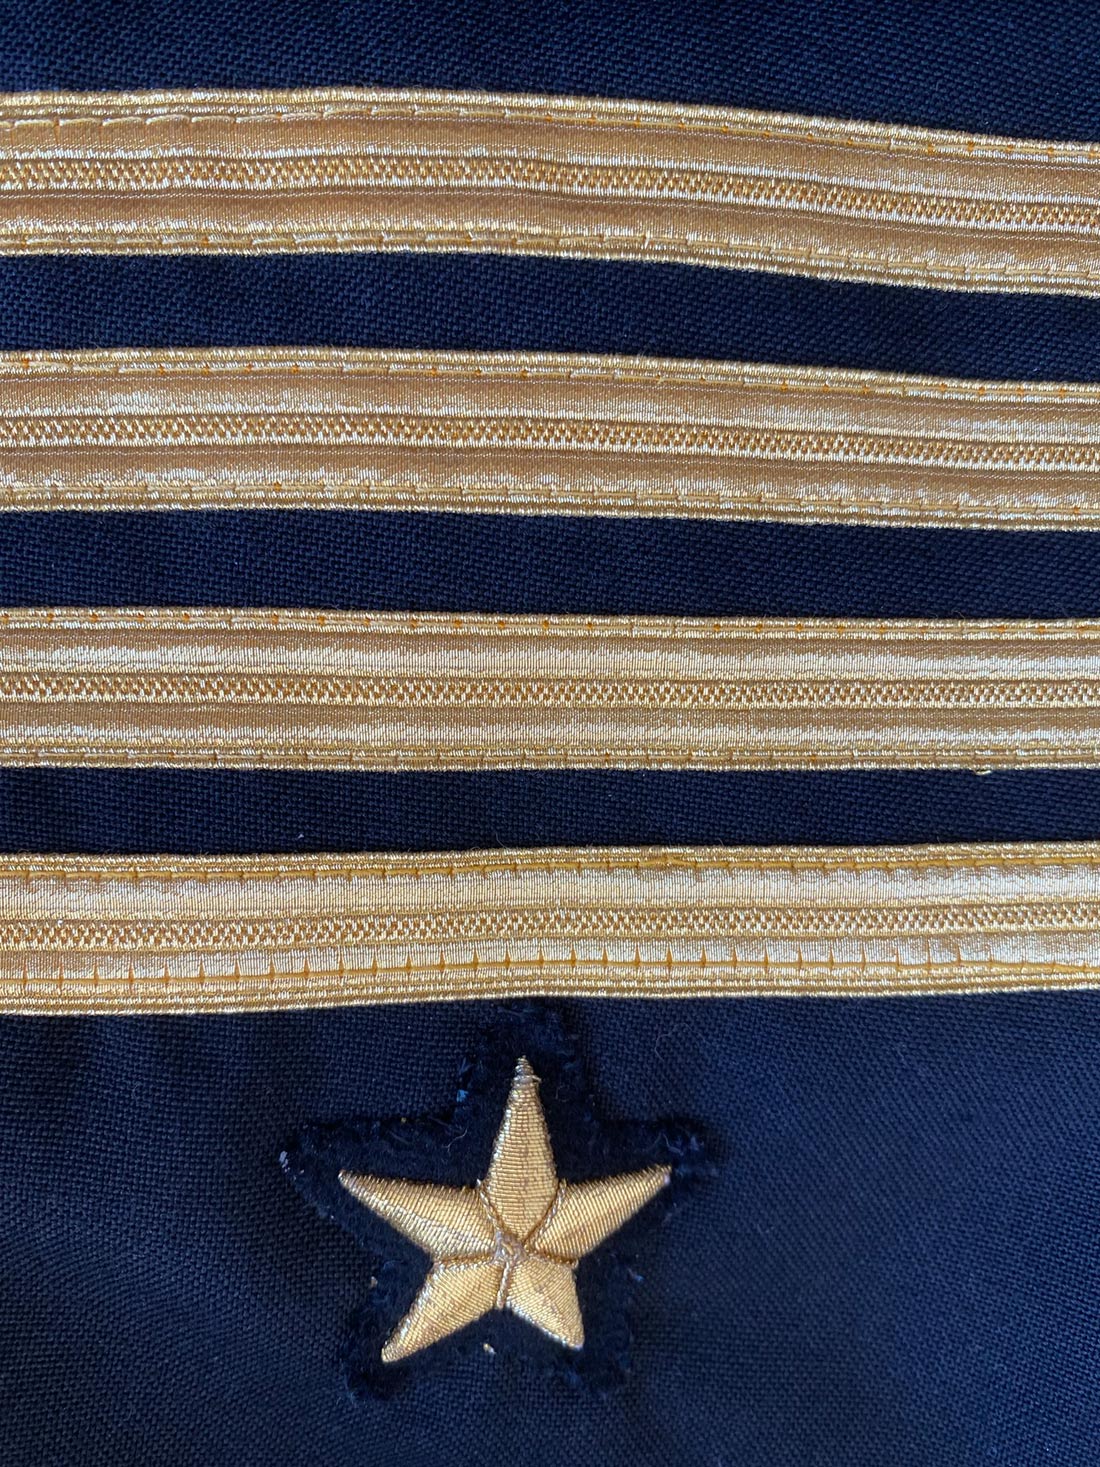 close up detail of stars and bars, USN officer's jacket